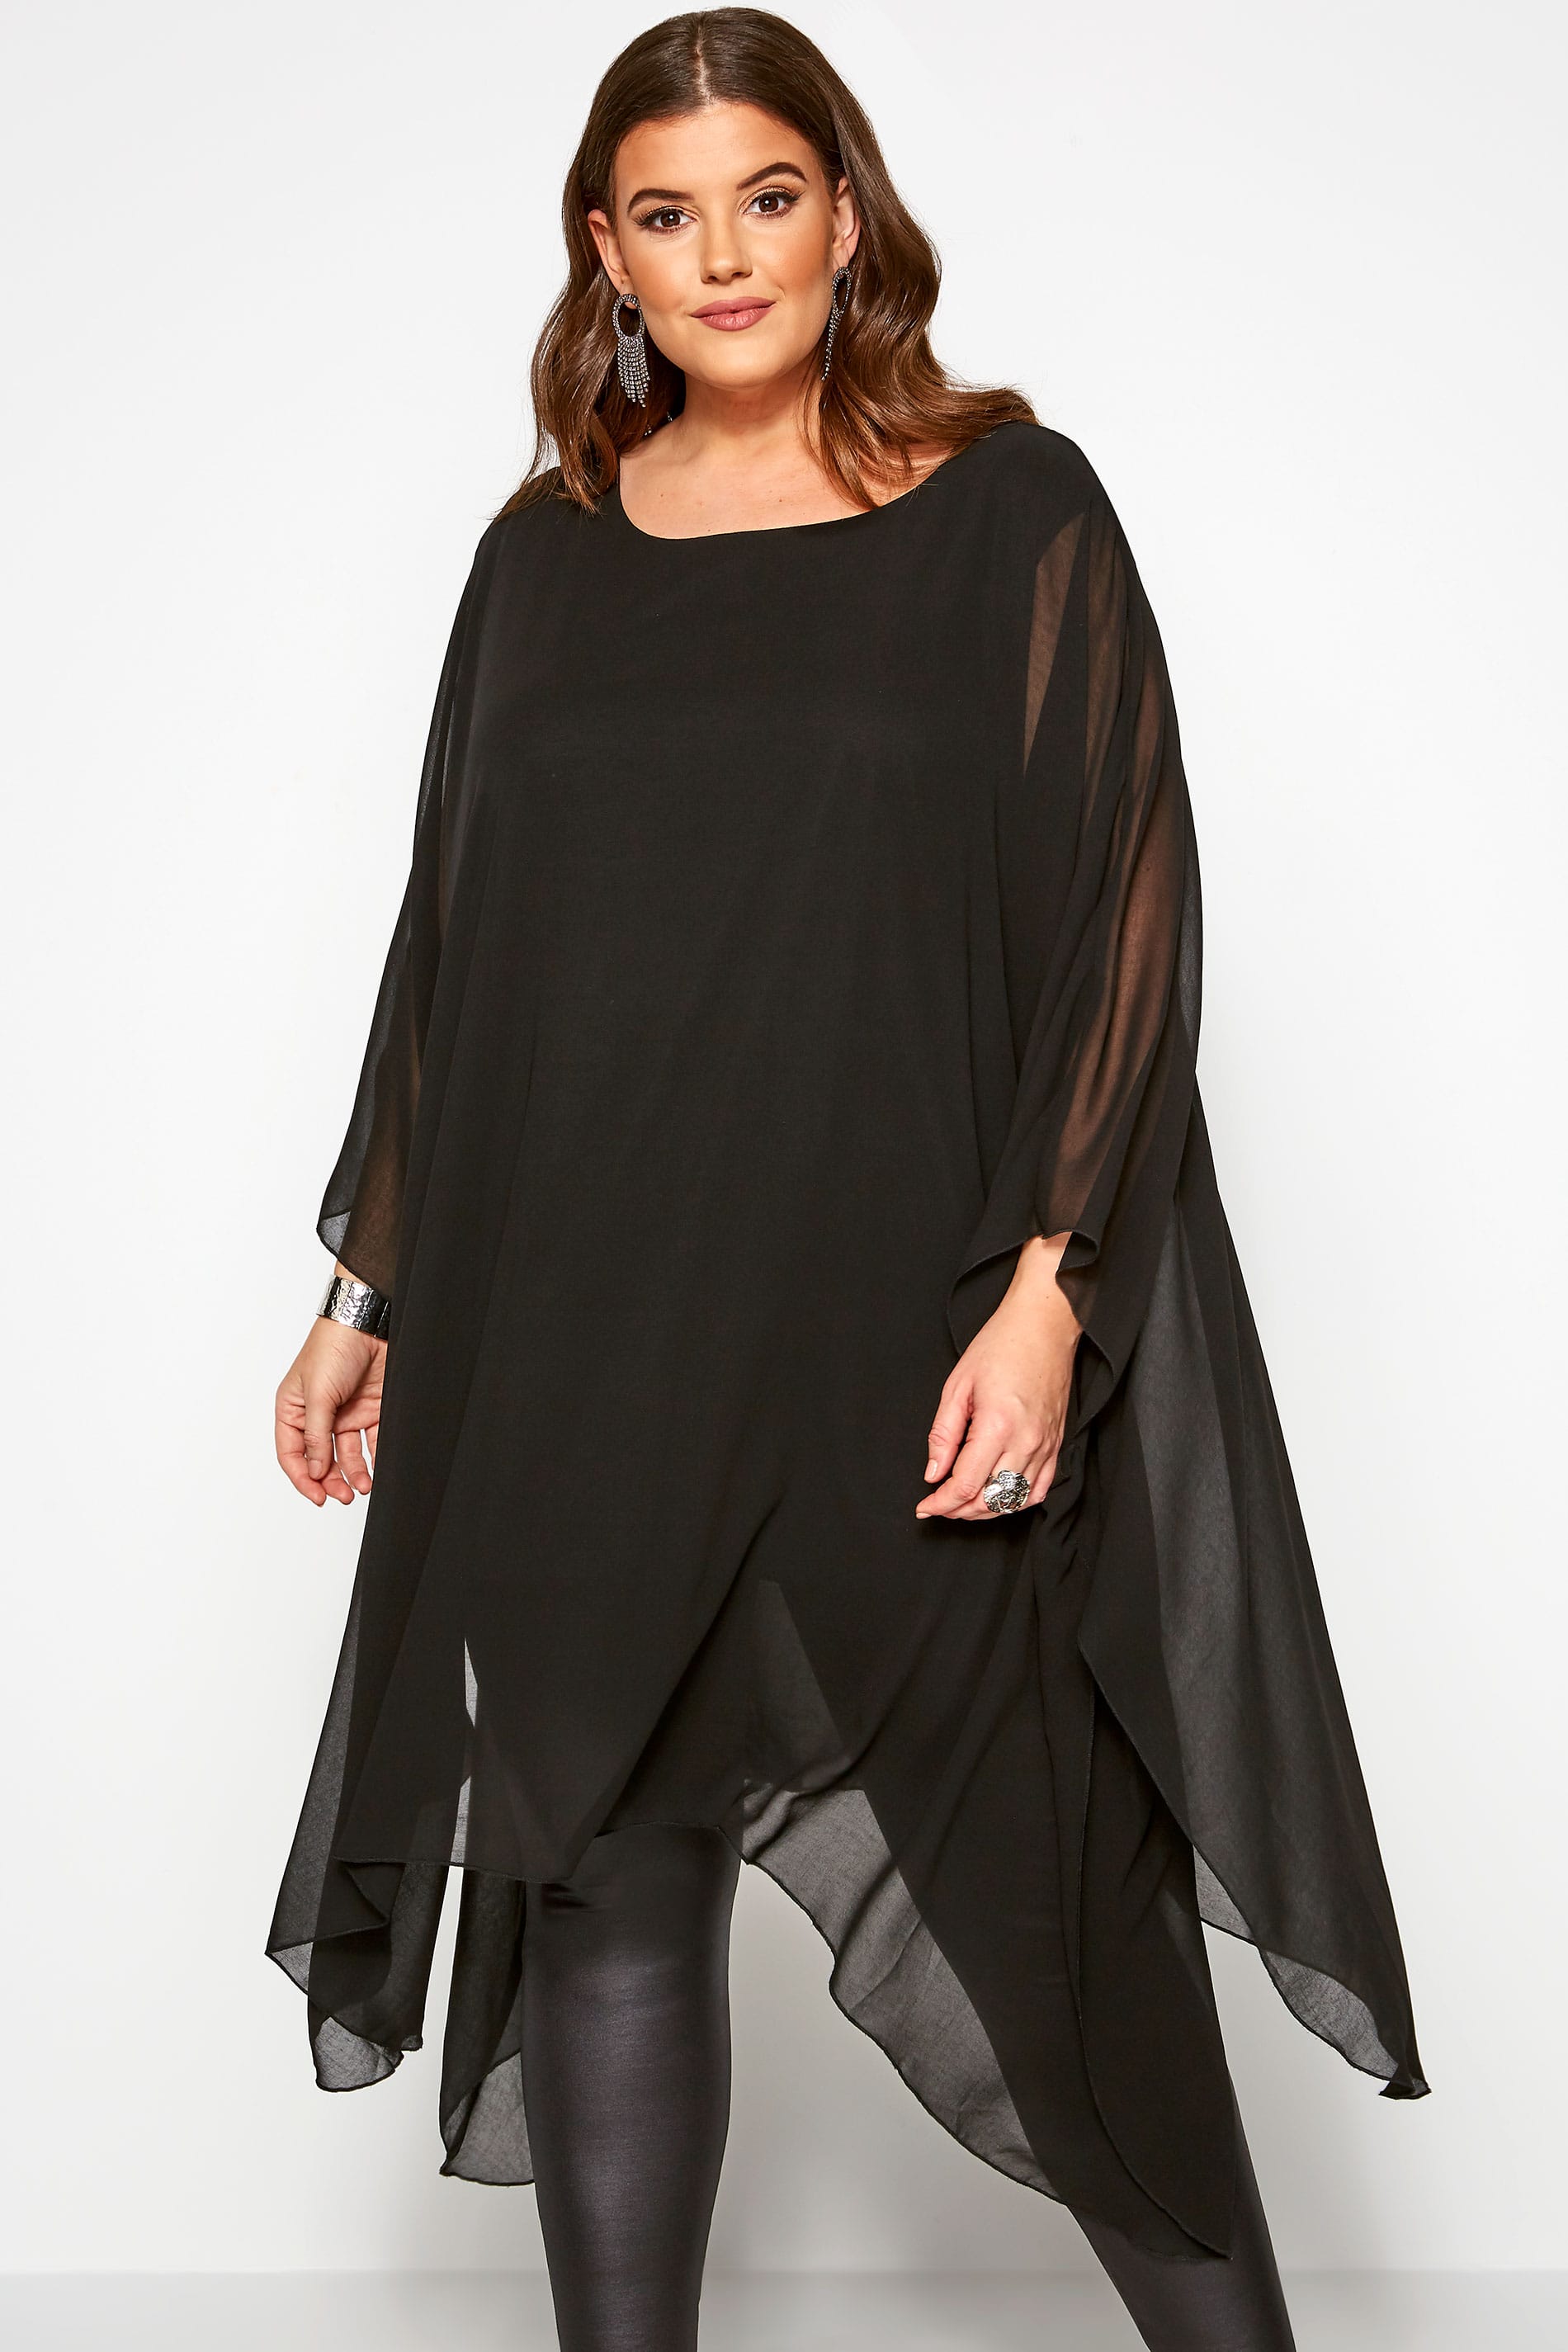 Black Chiffon Cape Top | Yours Clothing